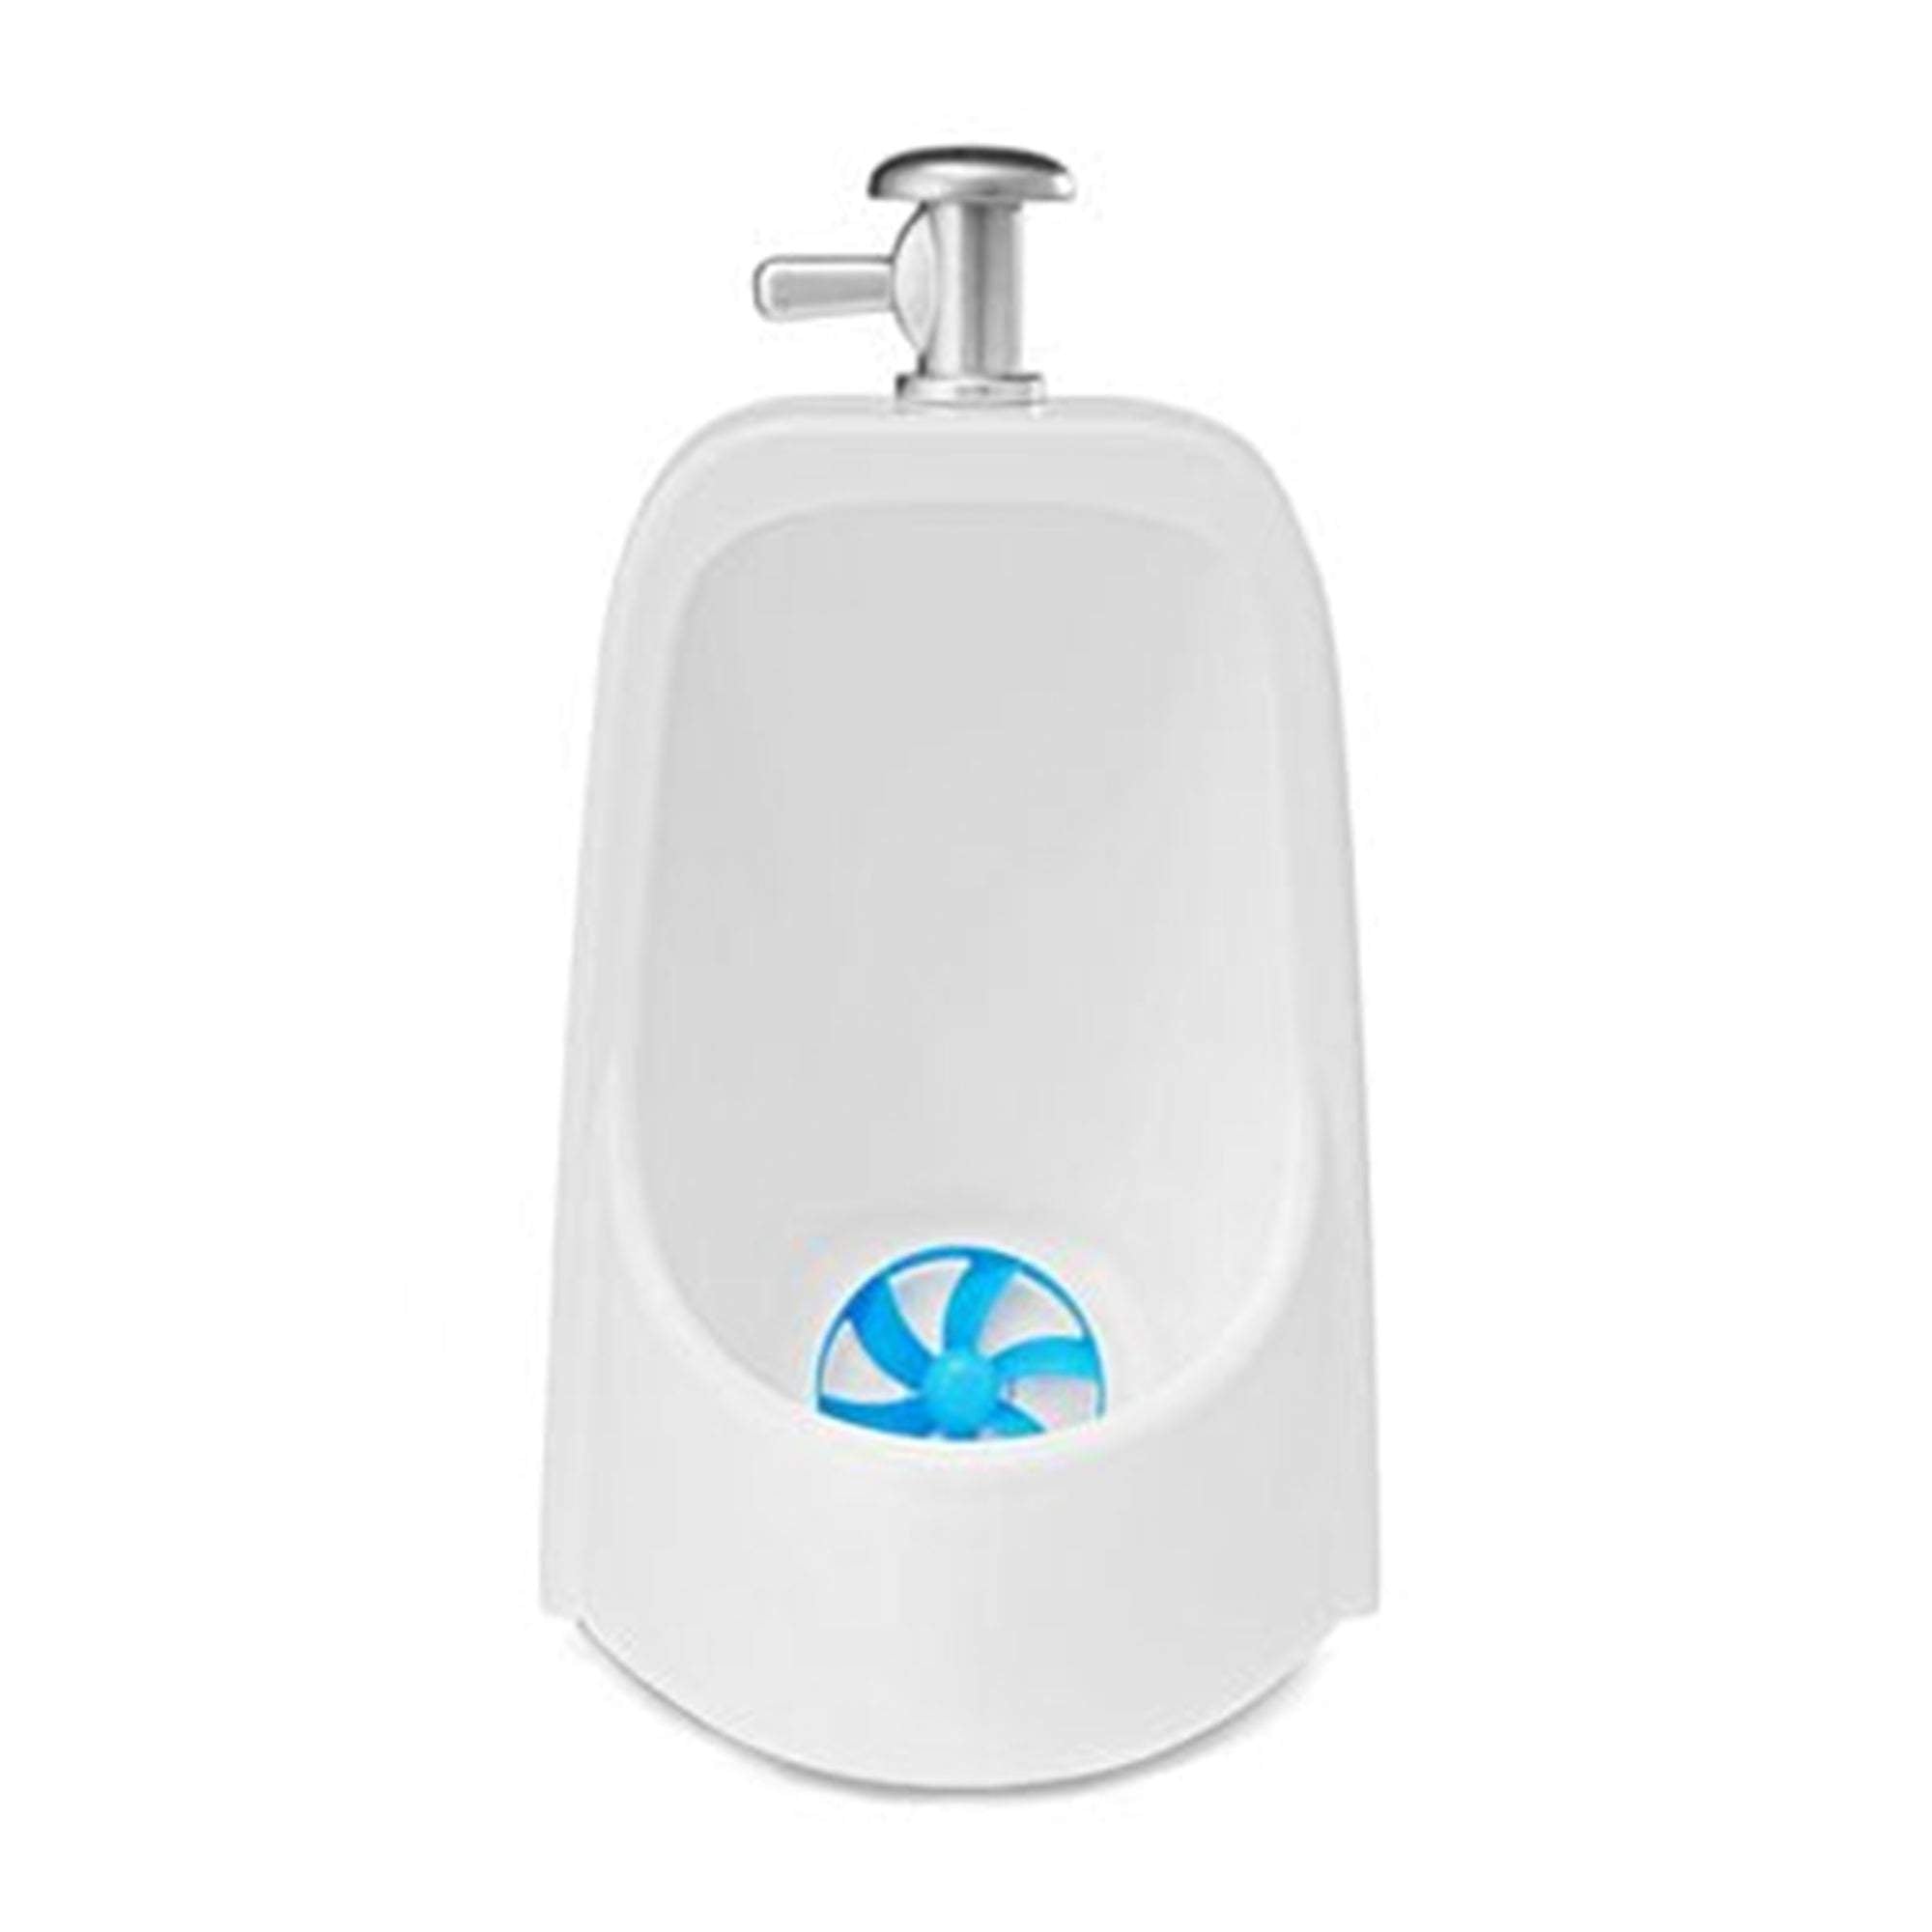 Summer Infant My Size Urinal 1L White2 || 18months to 48months - Toys4All.in